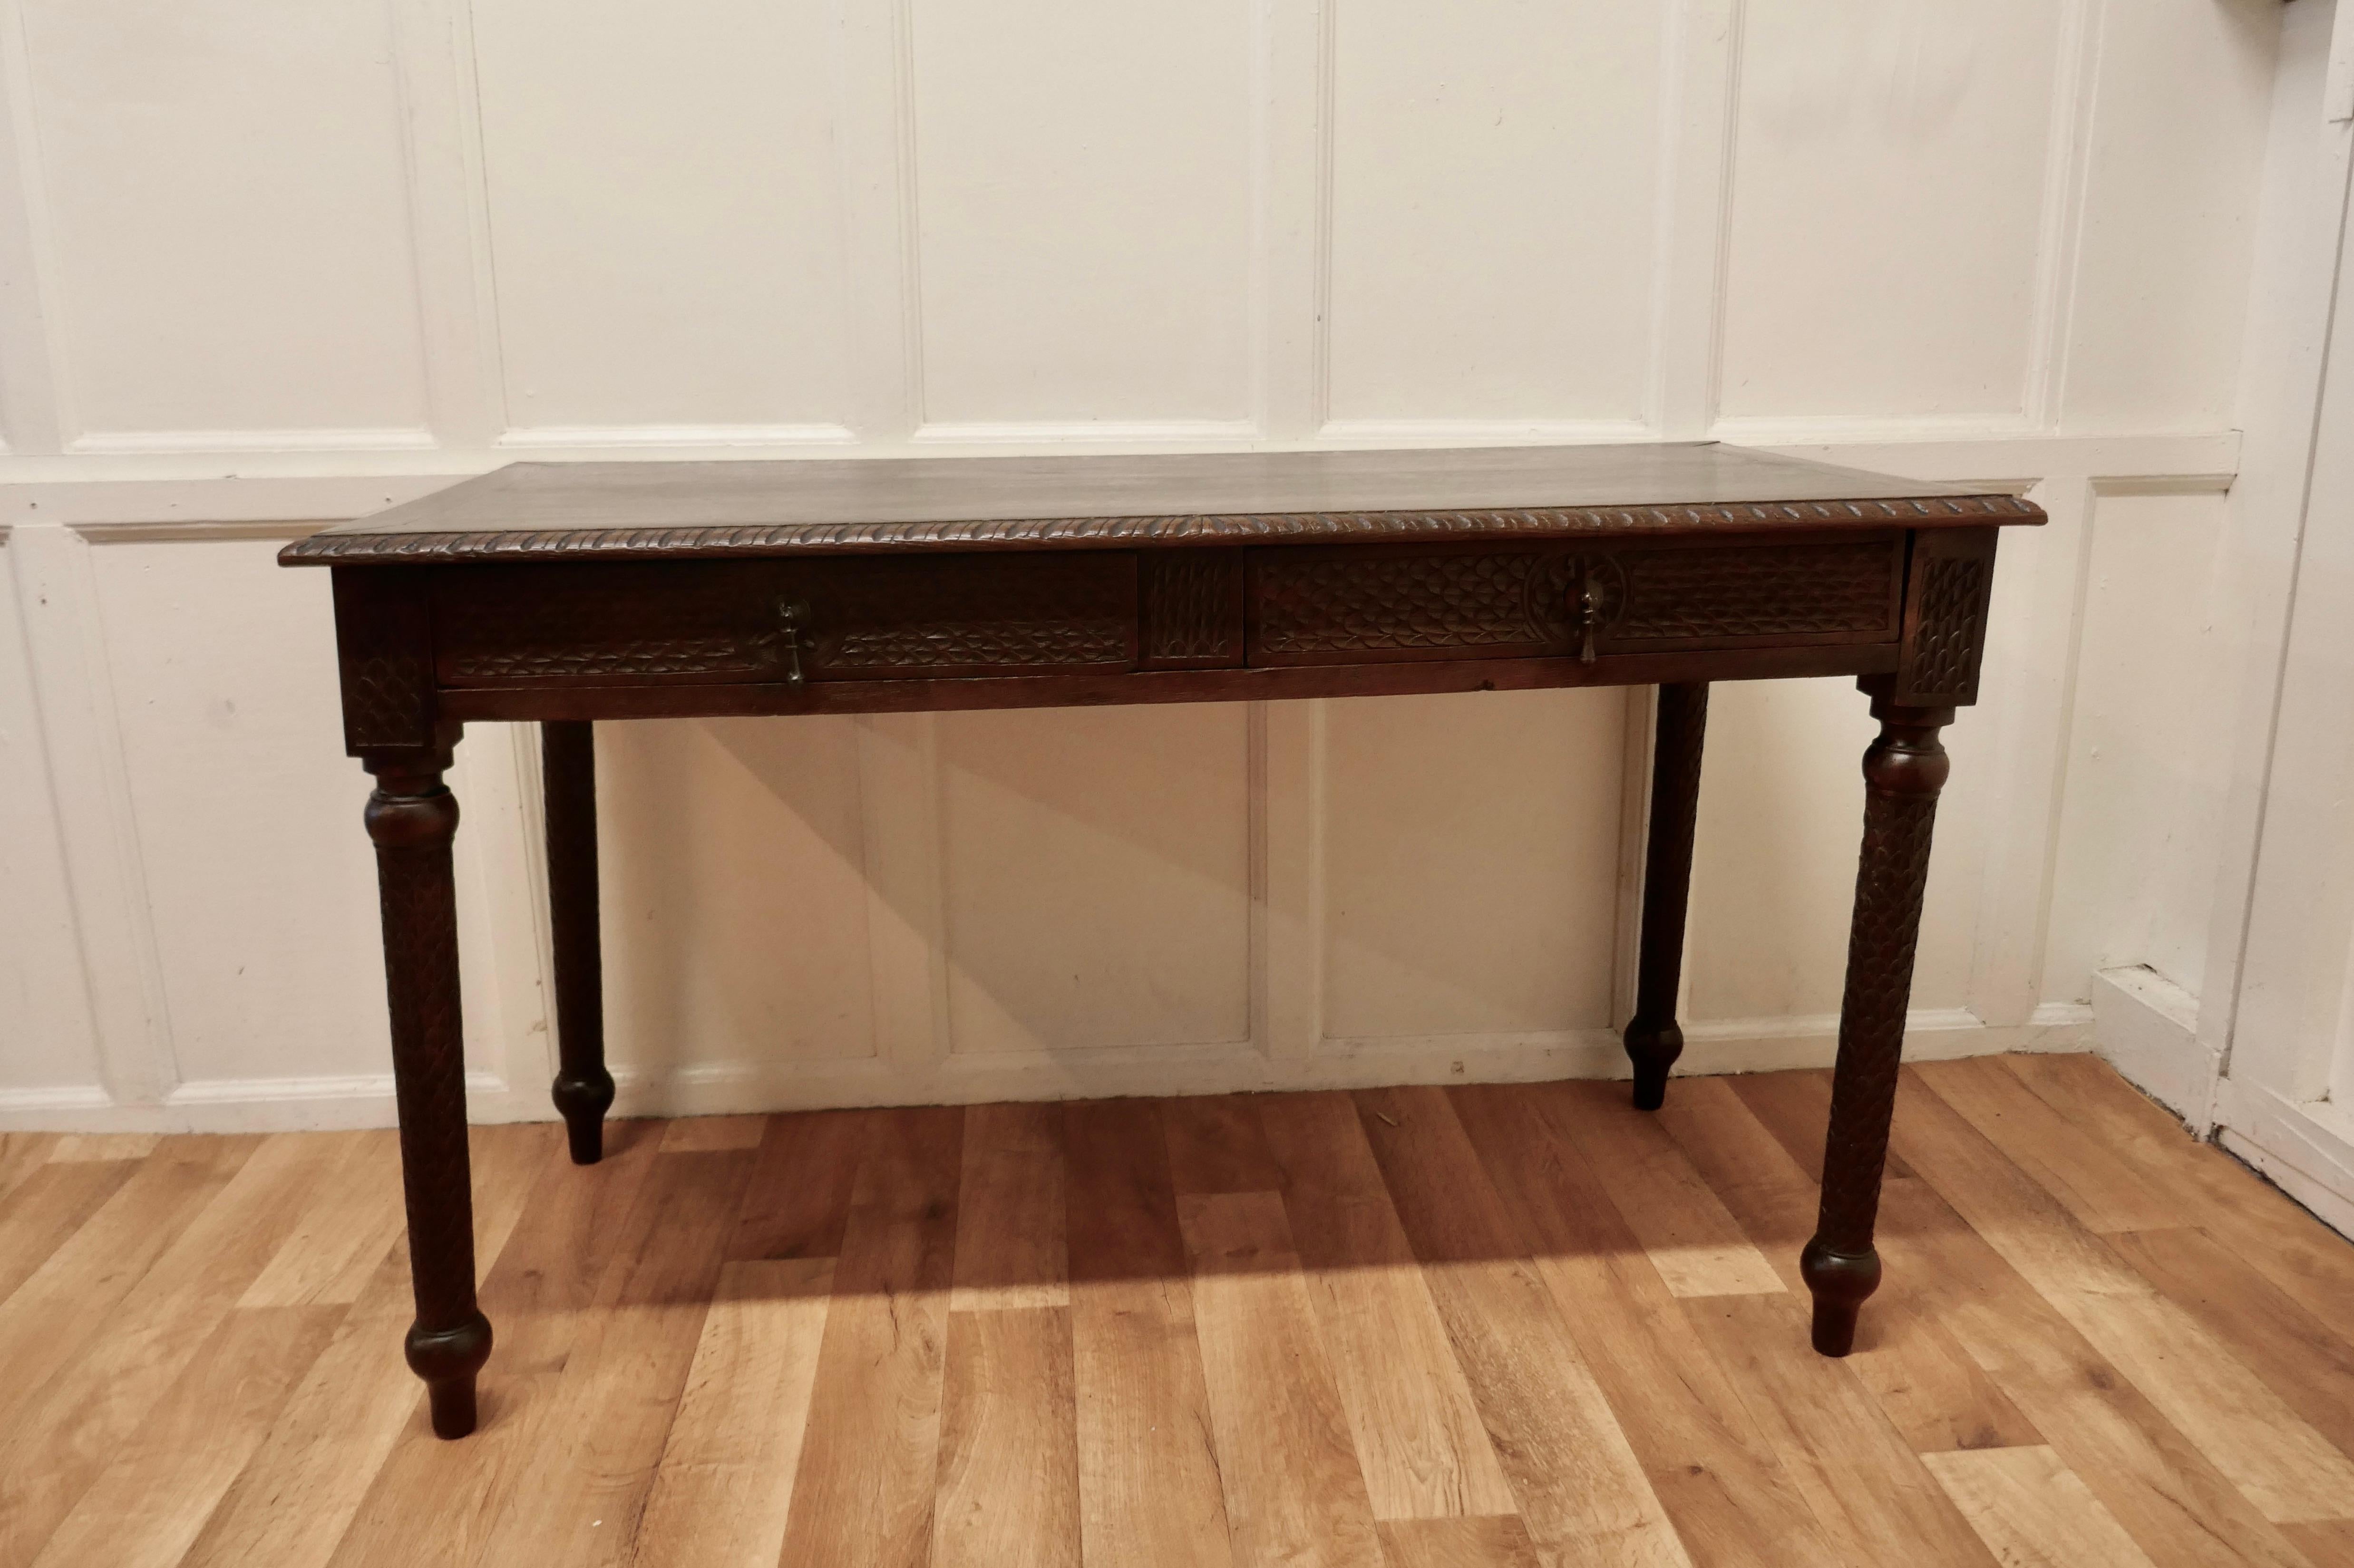 Victorian Carved Oak Writing Table
 
A particularly fine quality Writing table or desk the top has a rope carved top edge and a lattice style carved apron all round matching the decoration on the long elegant turned legs. 
The desk has 2 drawers